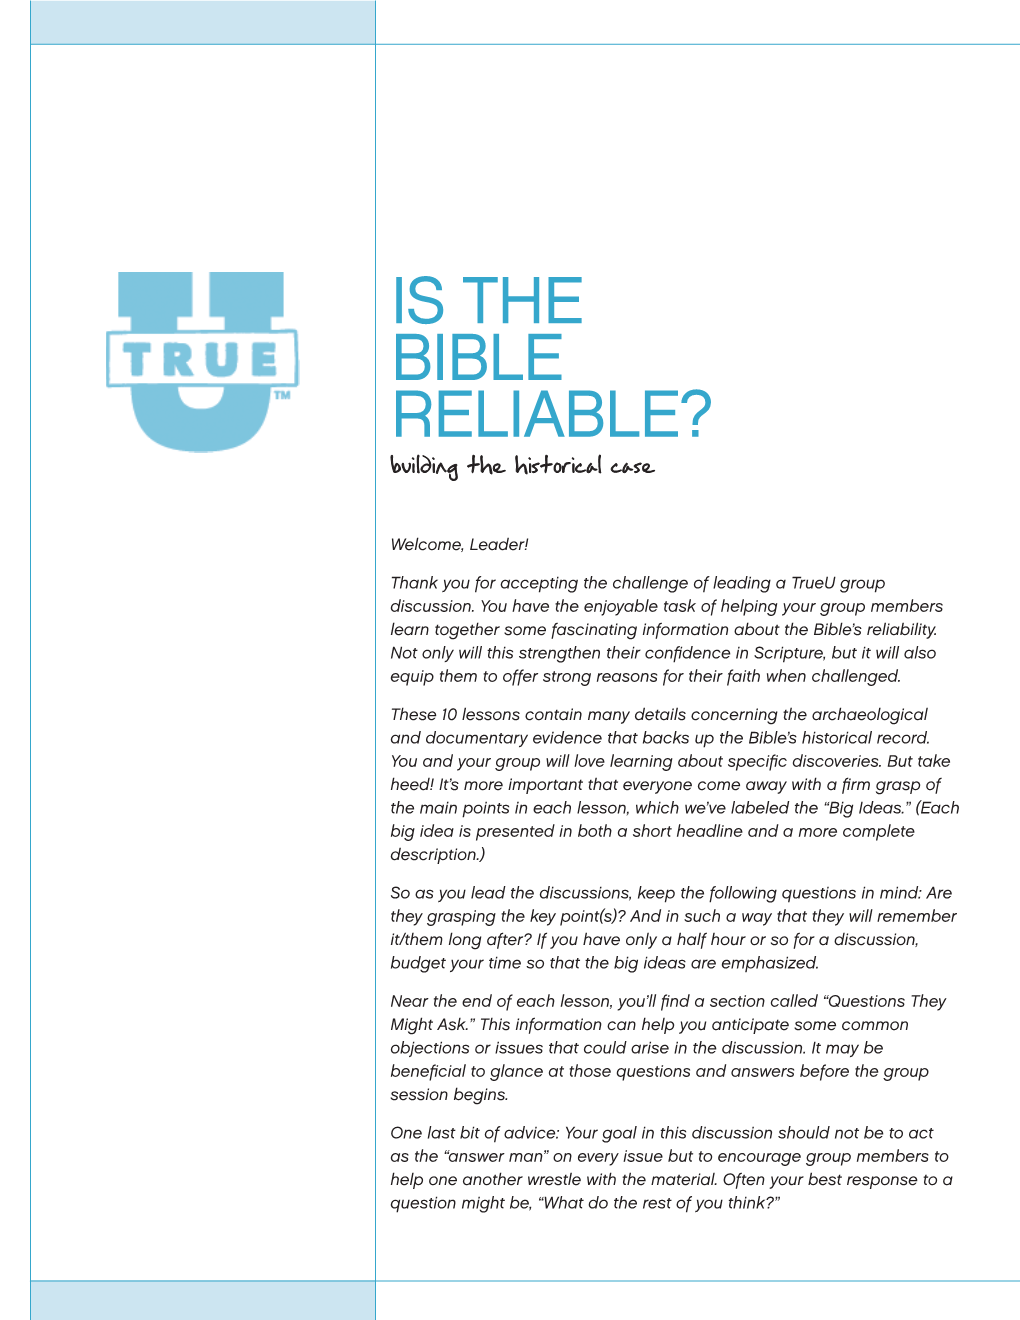 IS the BIBLE RELIABLE? Building the Historical Case